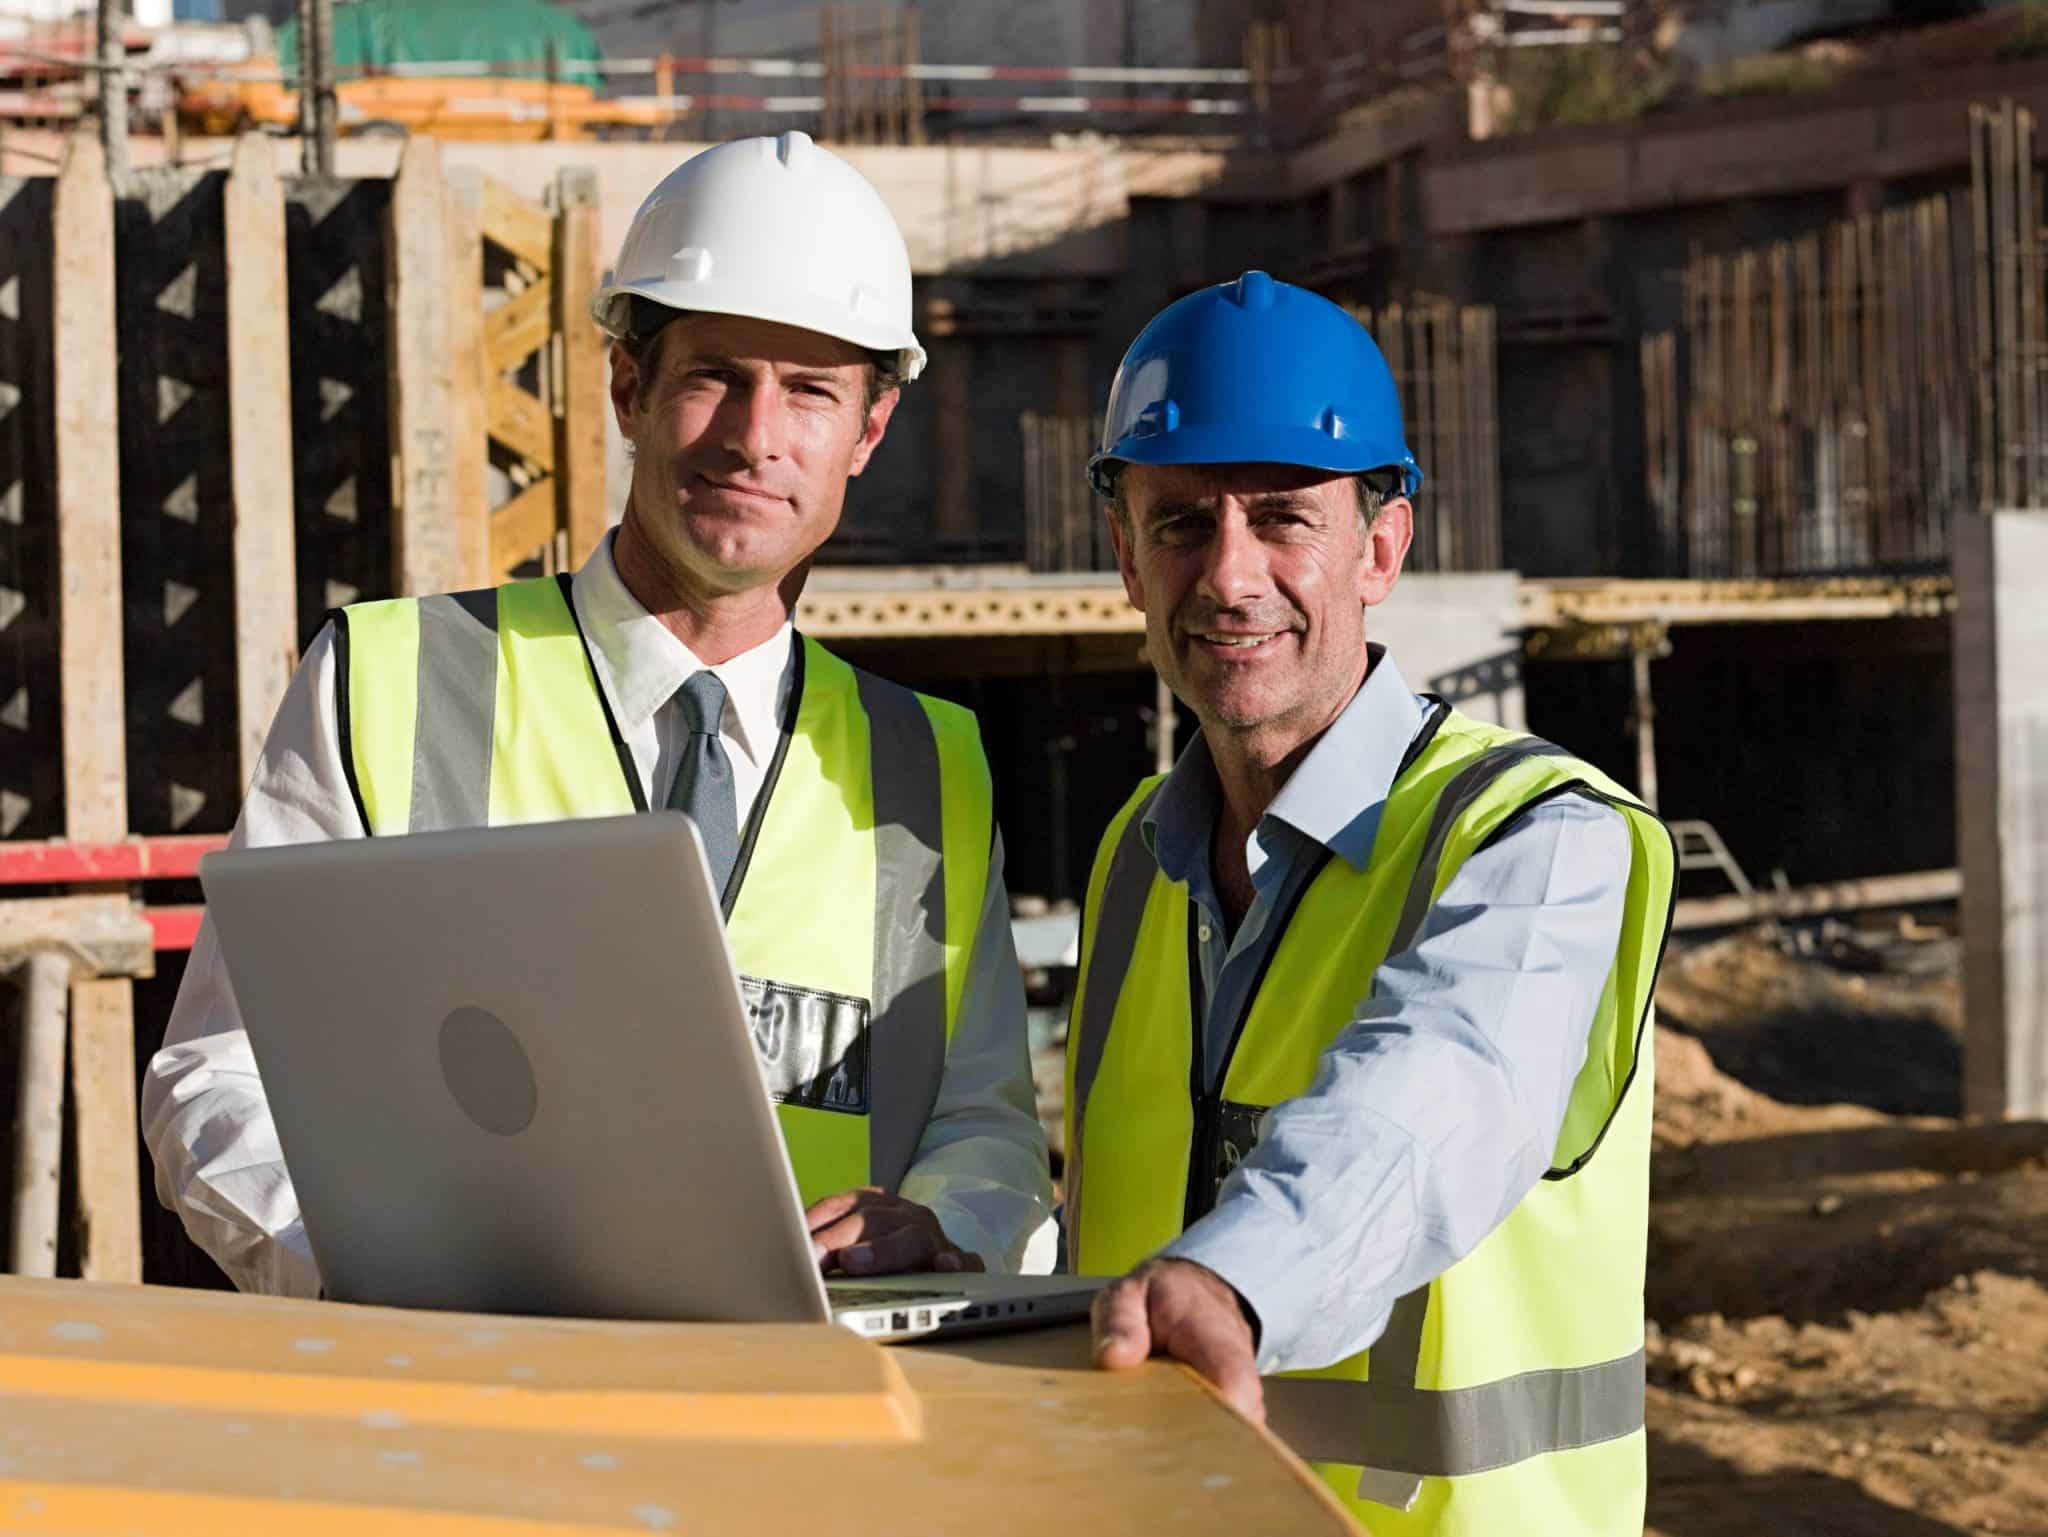 Mature men using laptop on construction site while wearing safety vests and hard hats.